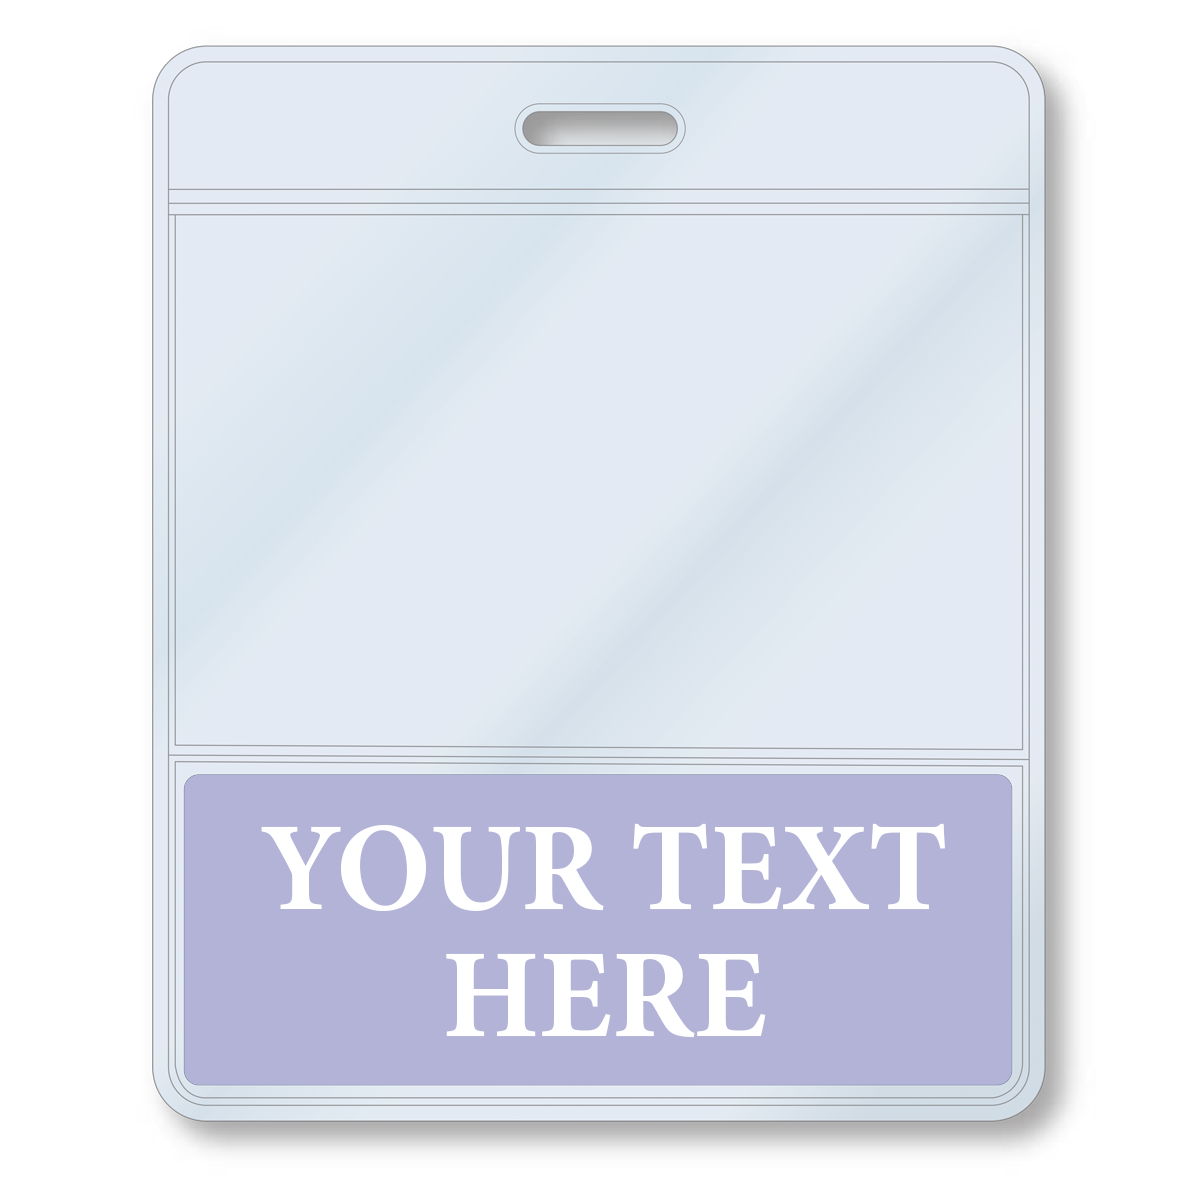 A Custom Printed BadgeBottoms® Horizontal (Badge Holder & Badge Buddy IN ONE) with a slot for a lanyard and a section for personalized text. The Badge Bottoms are highlighted in light purple with "YOUR TEXT HERE" in white capital letters, offering a customizable title for any occasion.
